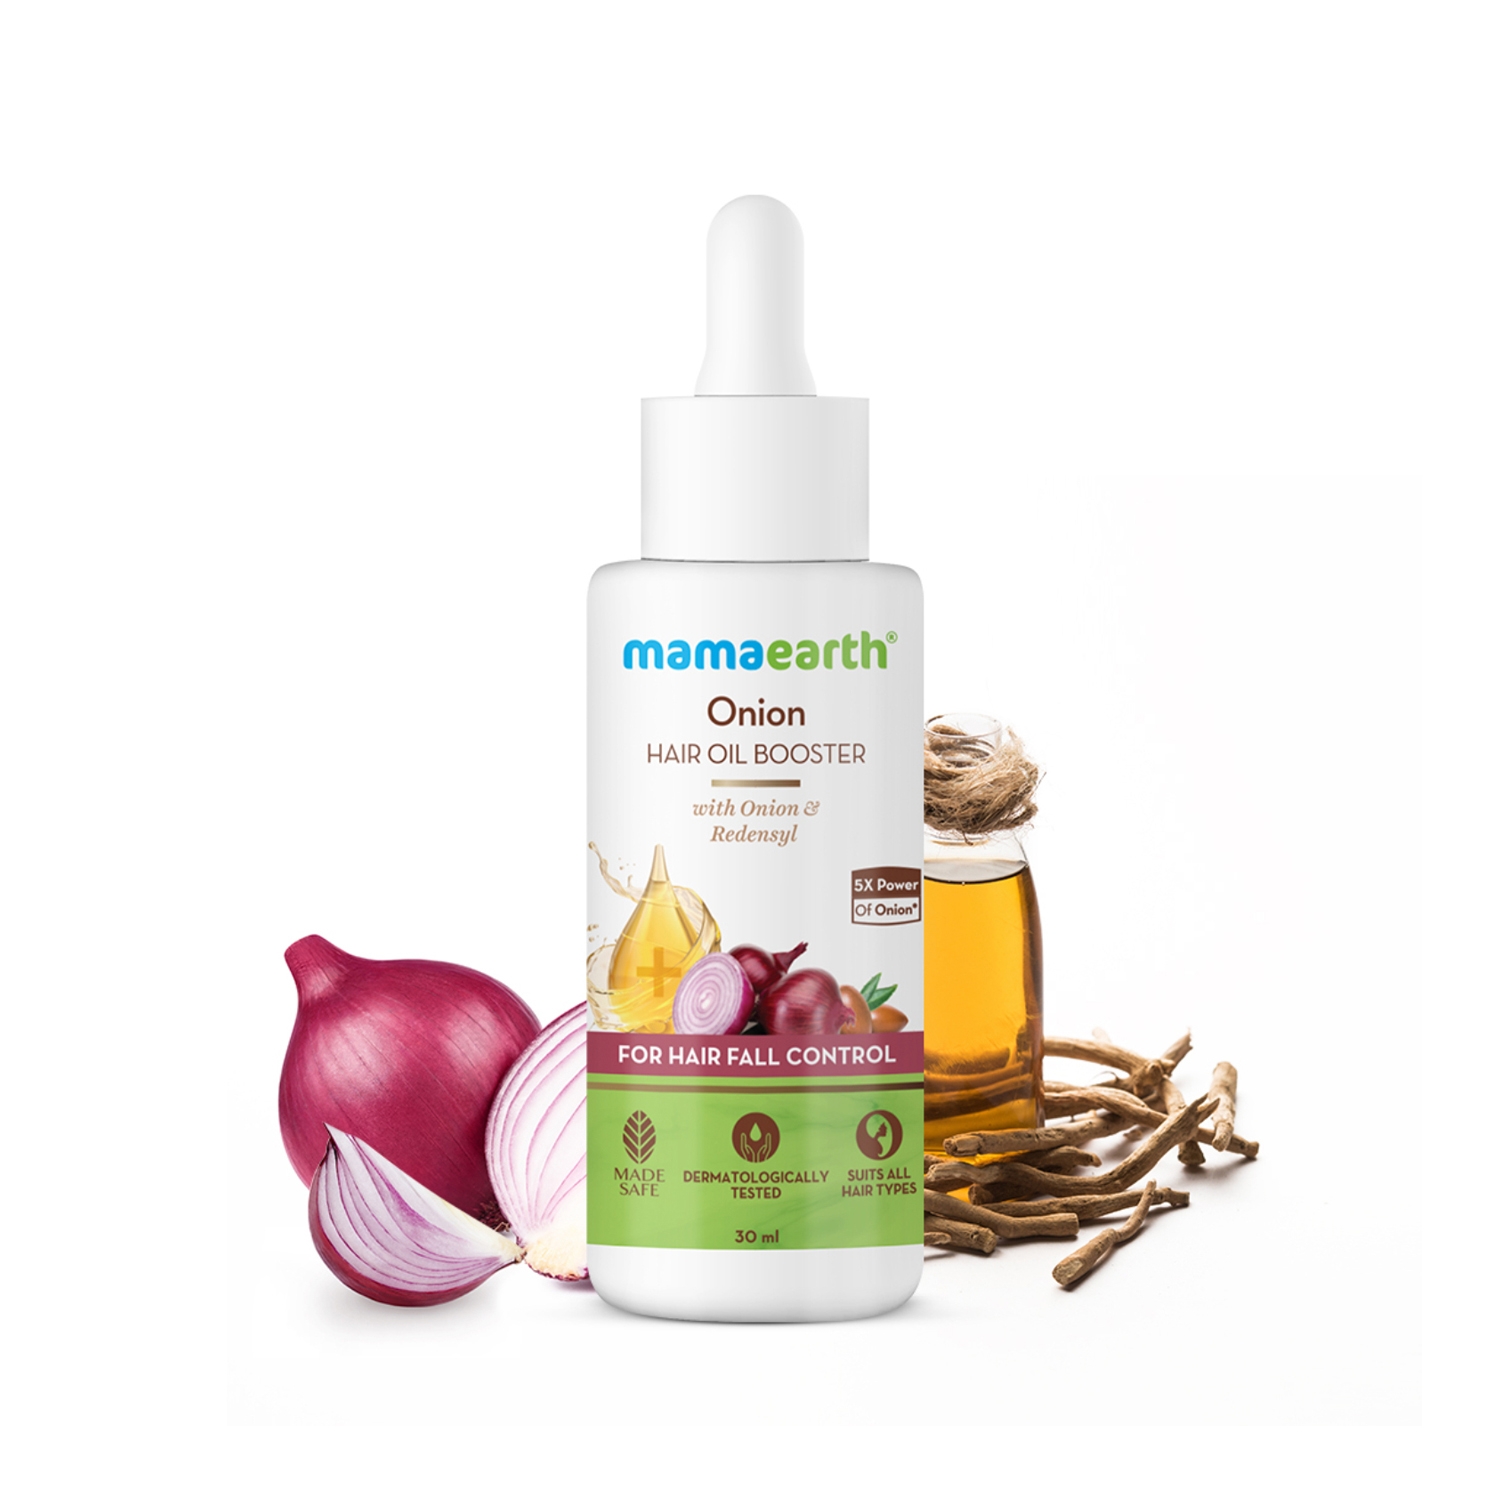 Buy Mamaearth Anti Hair Fall Kit-Onion Online in India at Best Price -  Allure Cosmetics